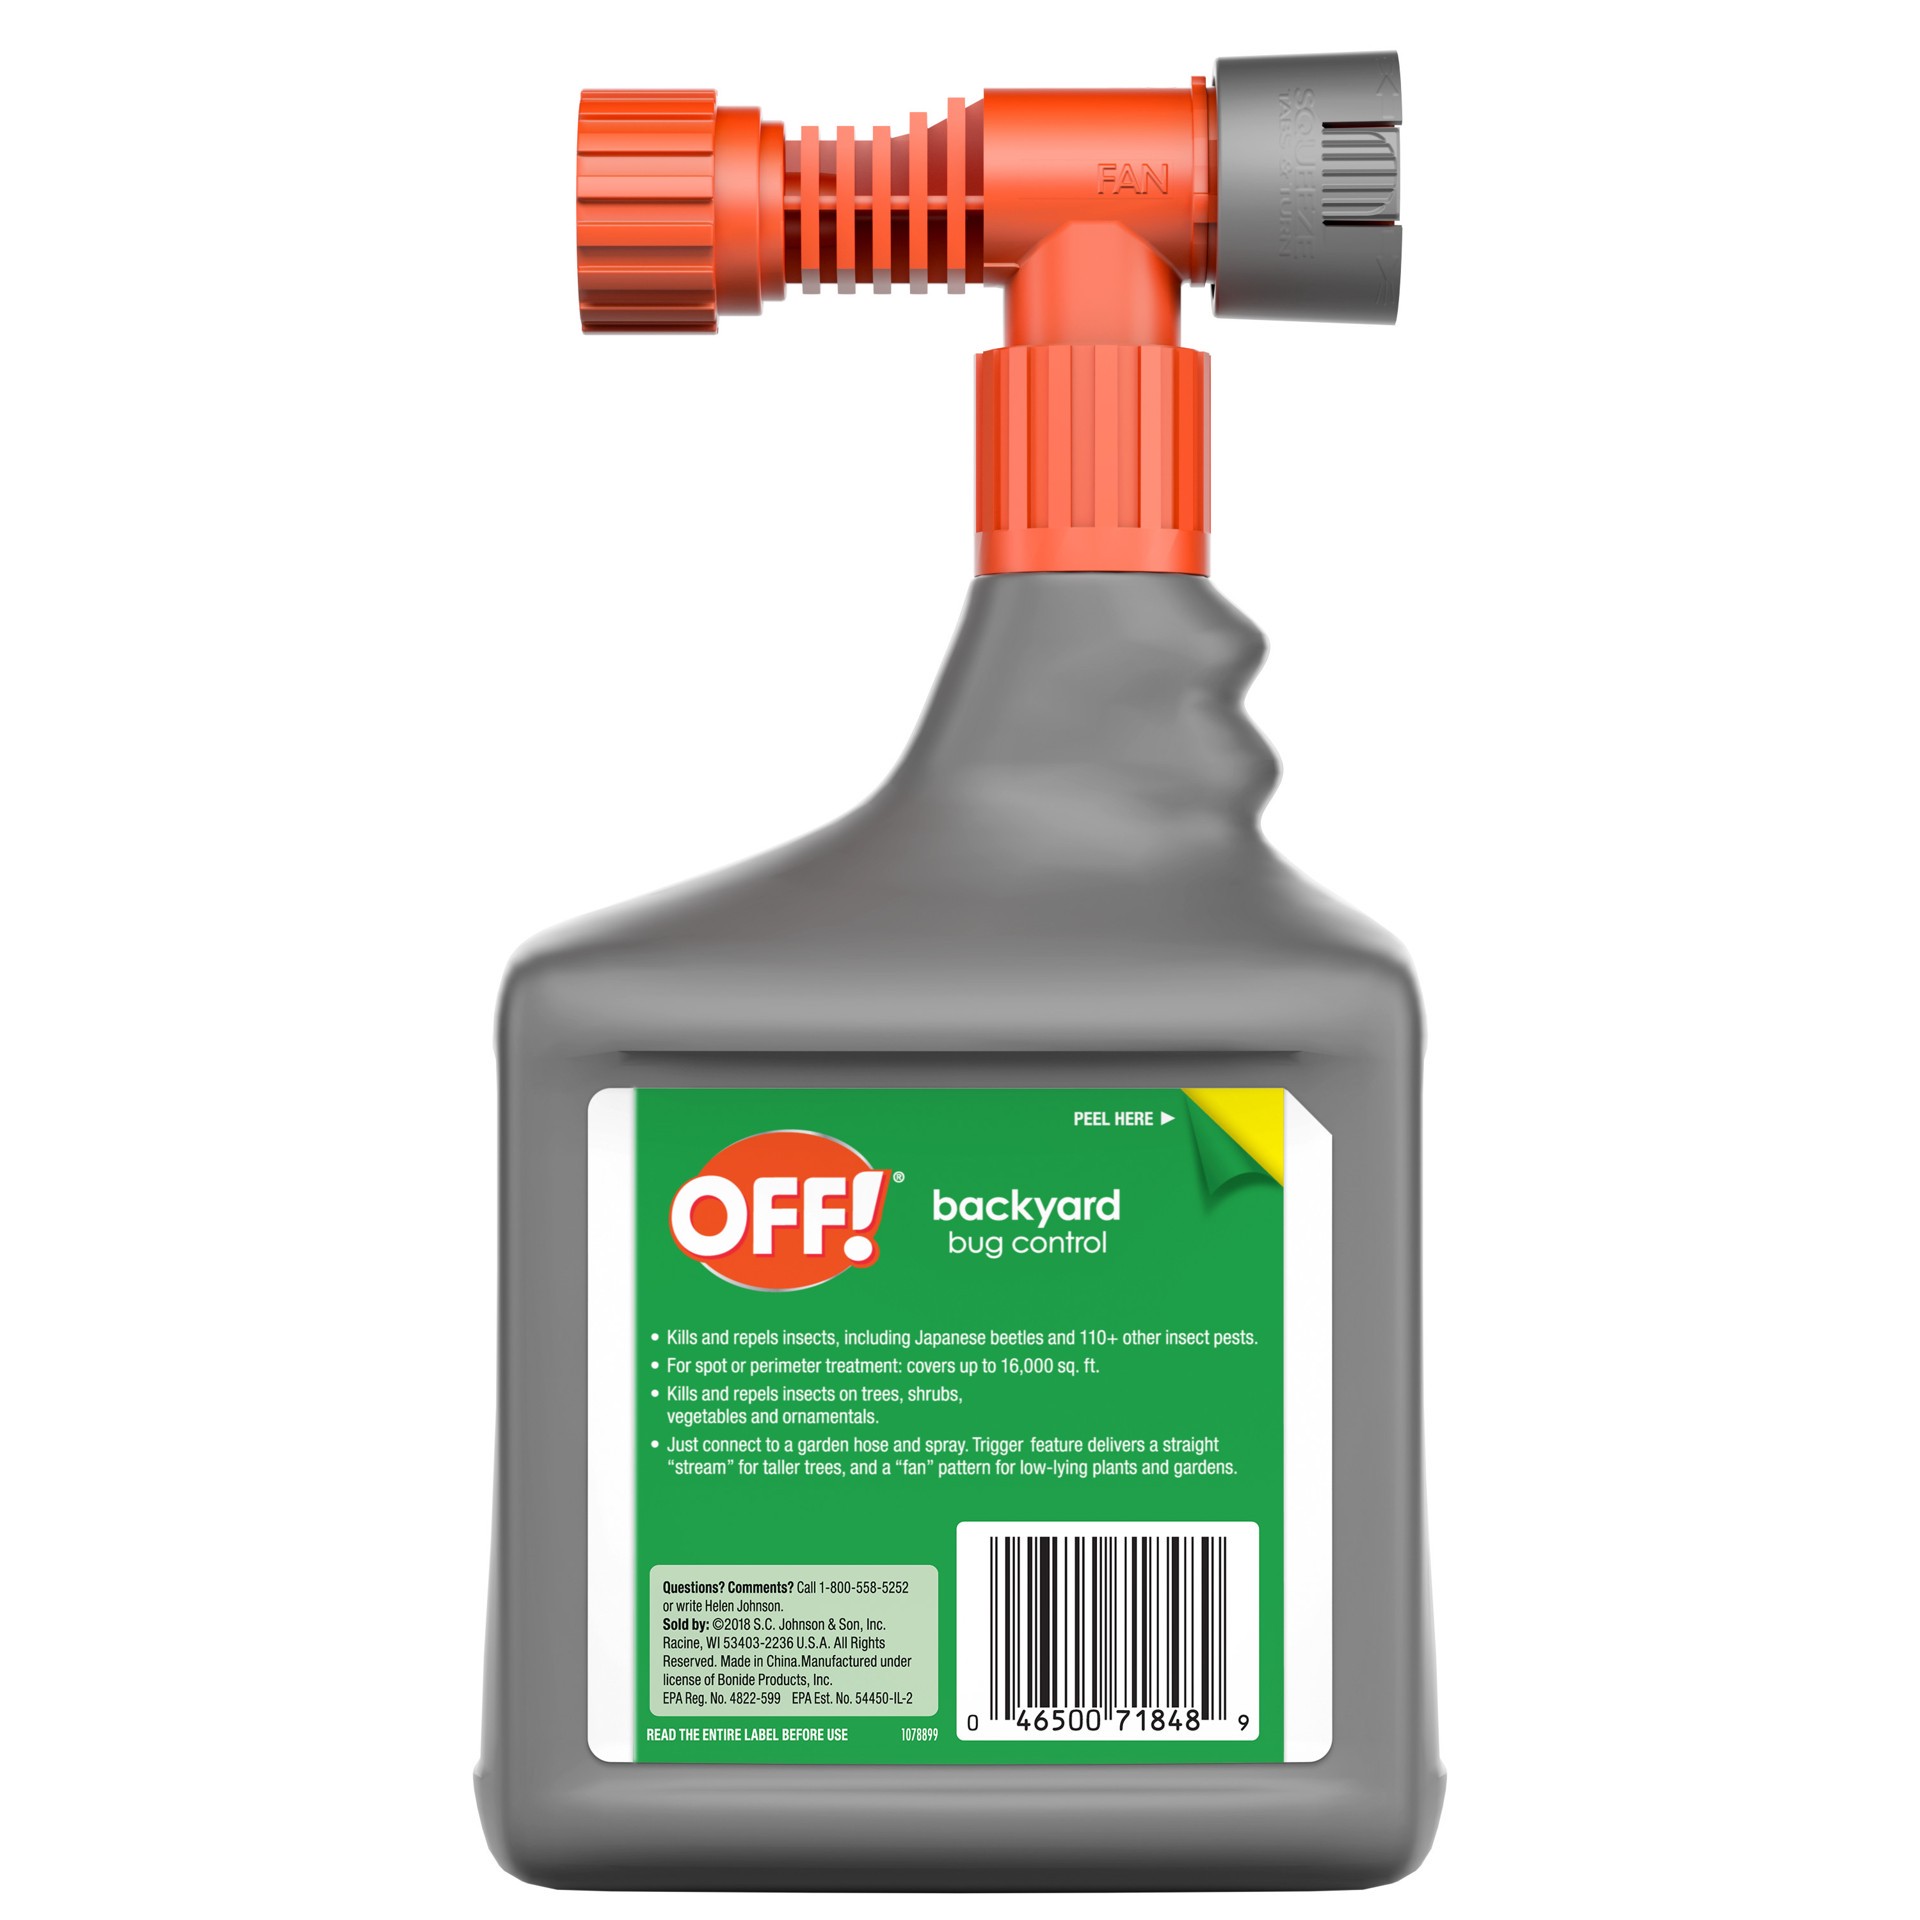 slide 5 of 5, OFF! Backyard Bug Control Pretreat, 32 oz, 1 CT, Outdoor Bug Treatment, Covers up to 16,000 sq. ft., Kills for up to 8 Weeks, With a Convenient Hose Connection, 32 fl oz